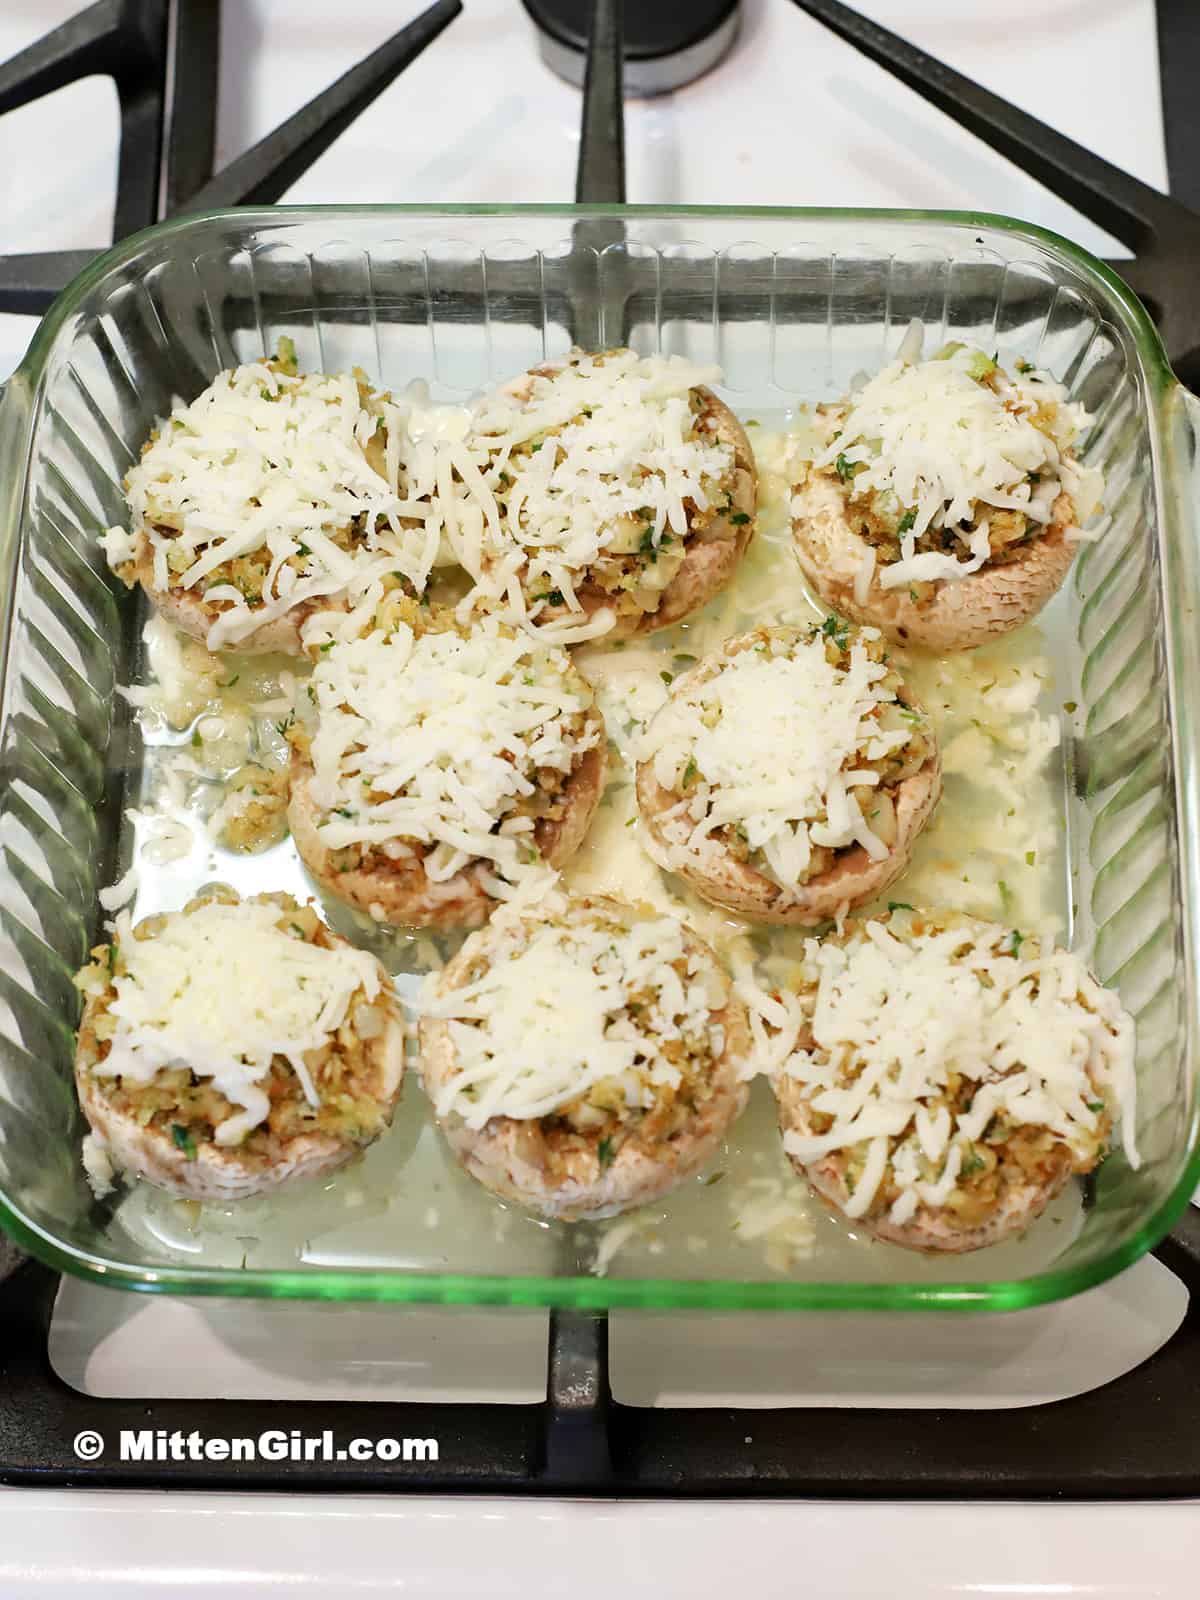 Shredded cheese on top of the stuffed mushrooms.